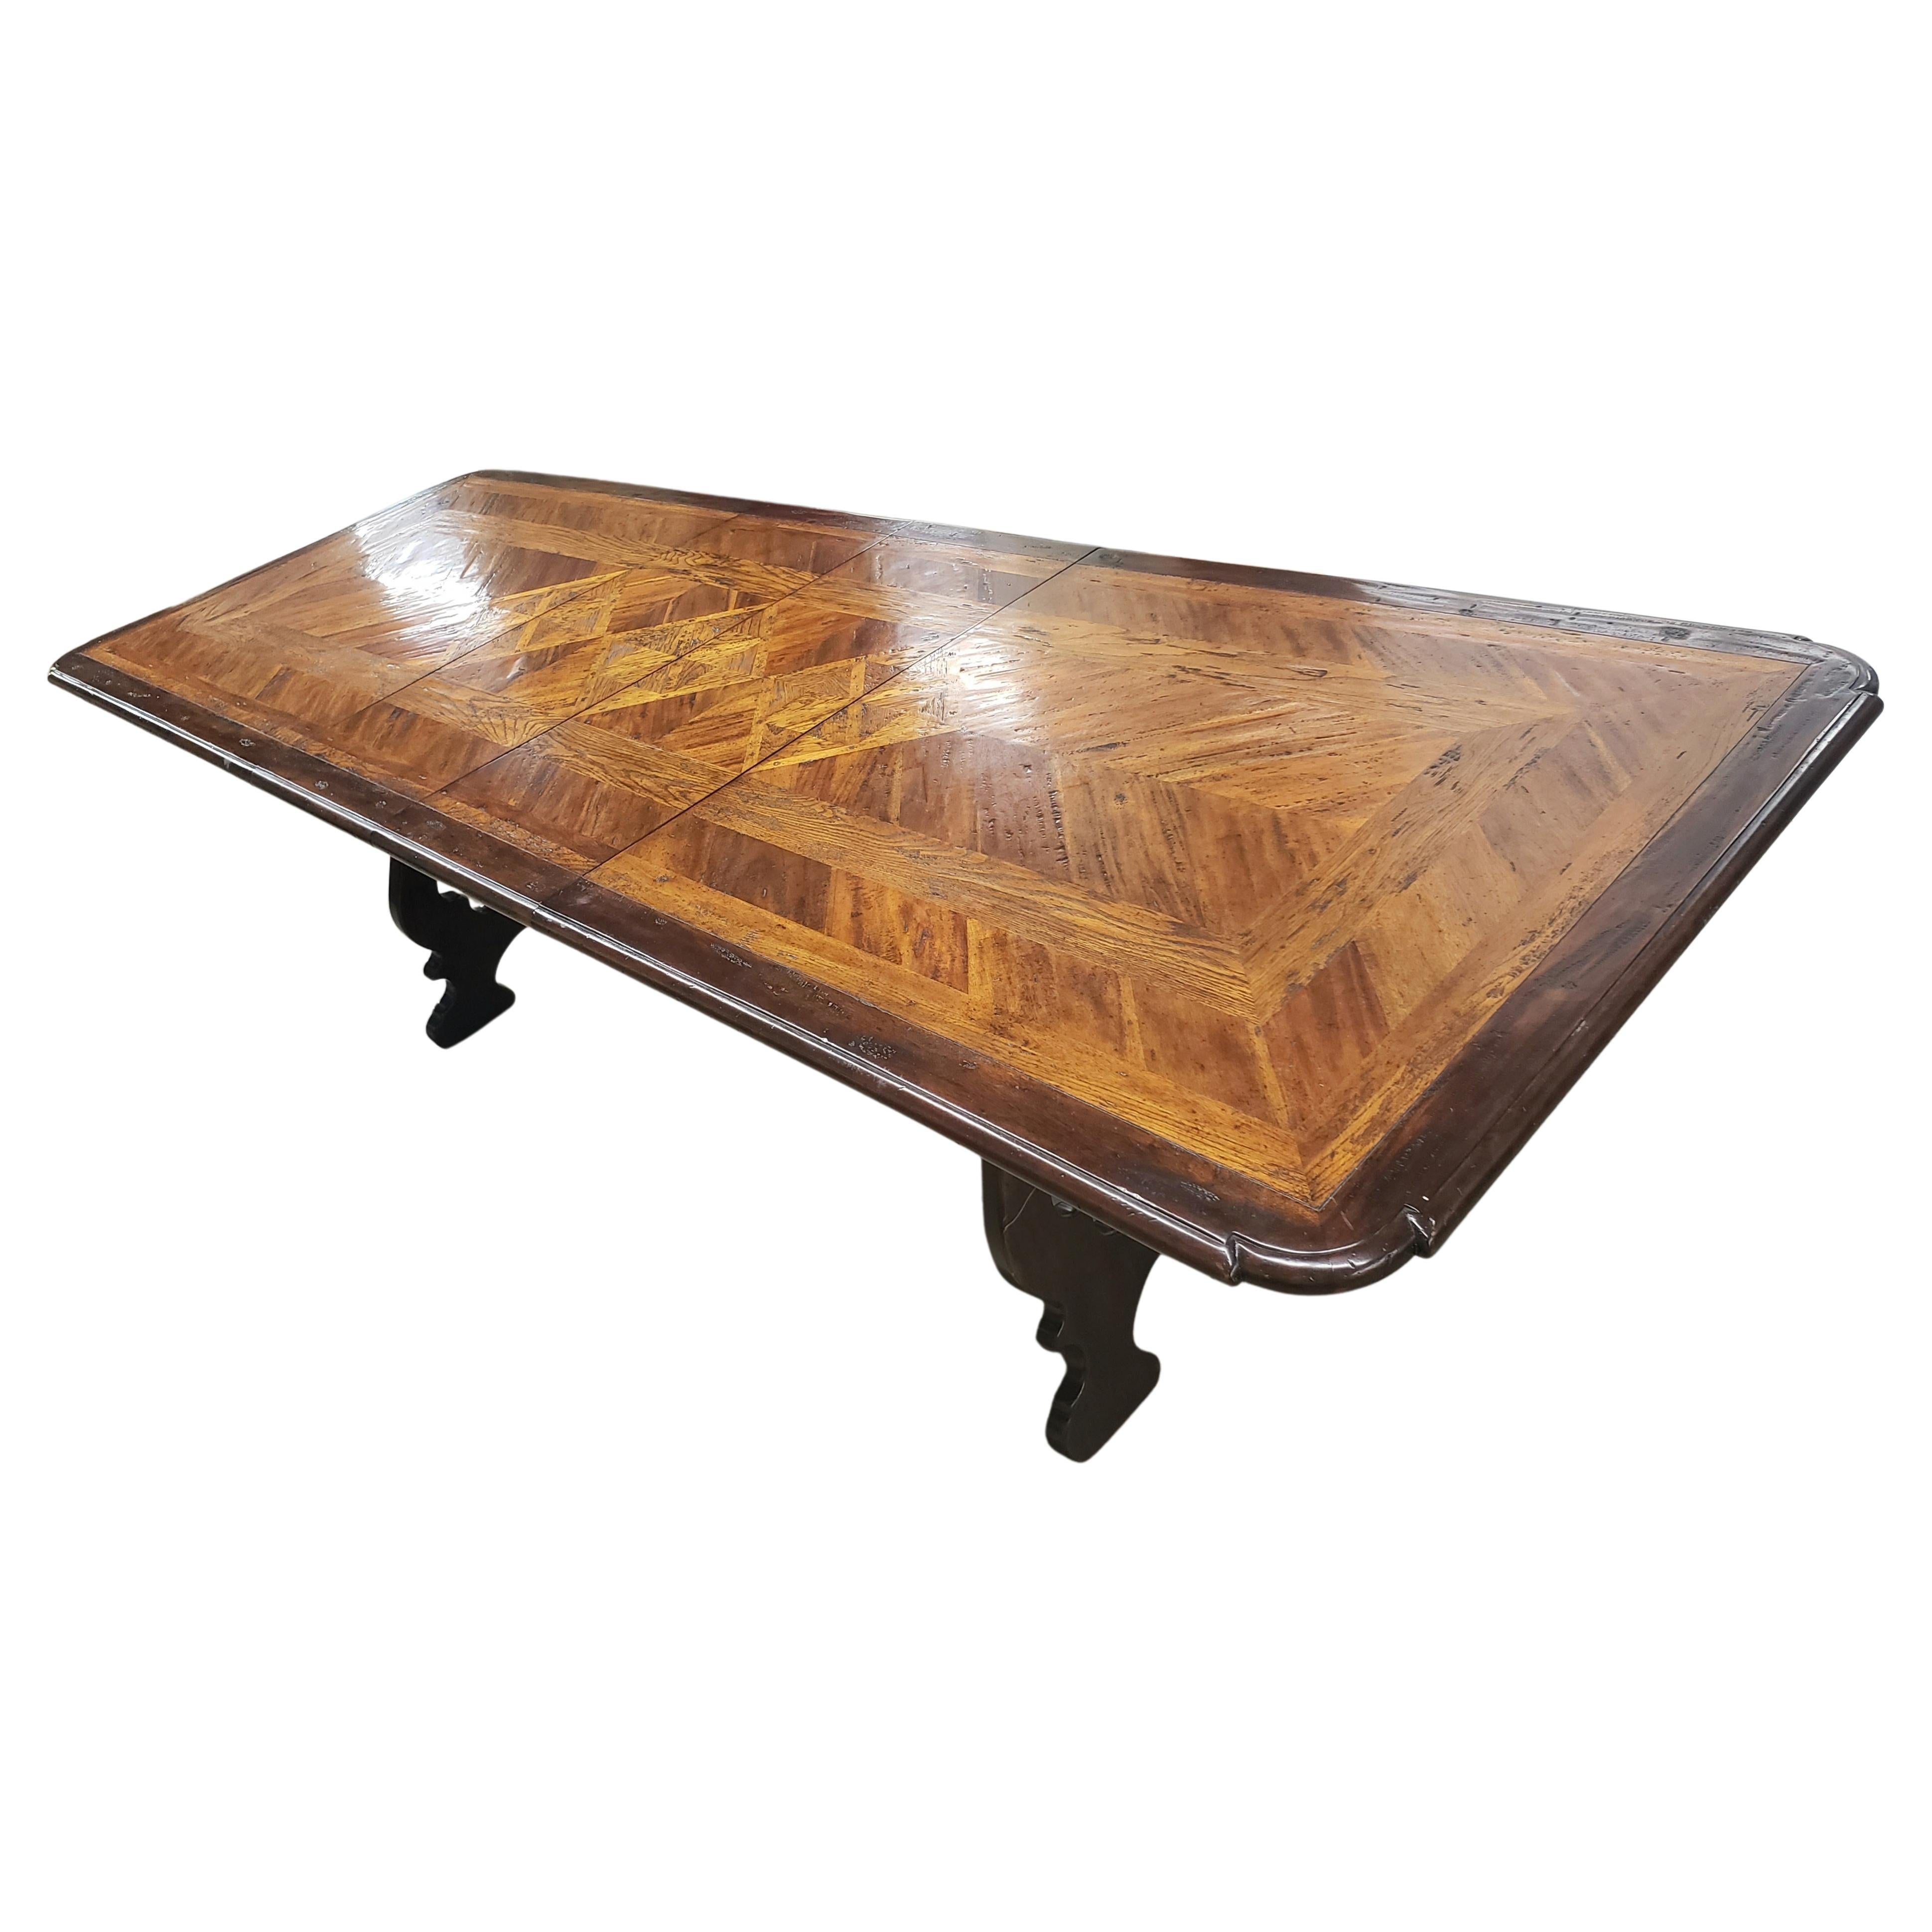 A stunning heavy parquetry dining table. Extendable with two self contained leaves of 16 inches each.
Amazing banded and book matched parquetry work of various Solid woods species, distressed by design and varnish finished. Trestle bar connected to